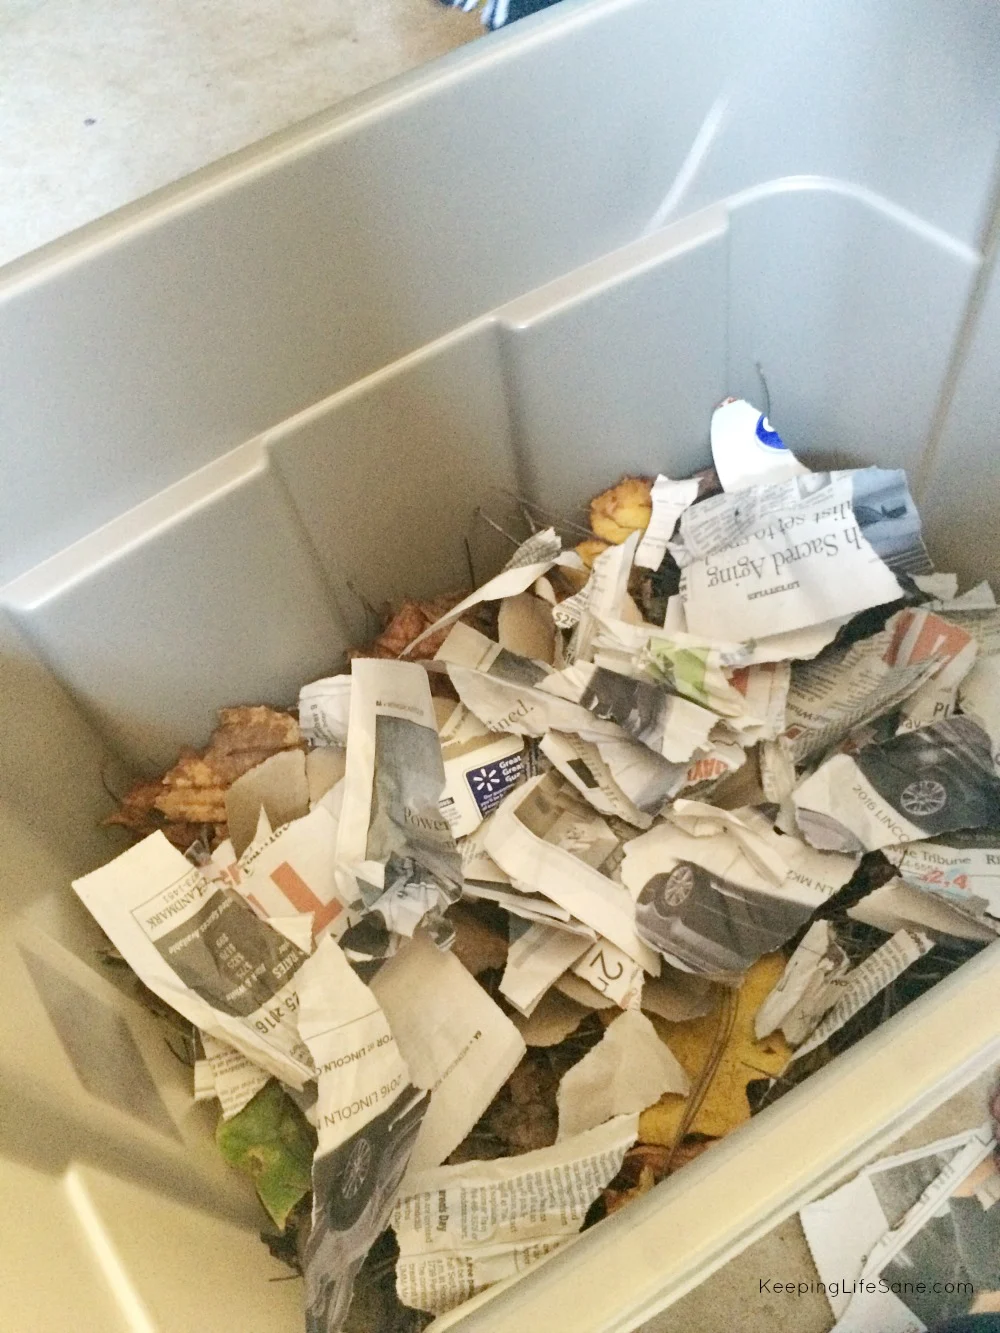 Closeup of inside of Rubbermaid bin that has dried leaves and torn up pieces of newspaper inside.